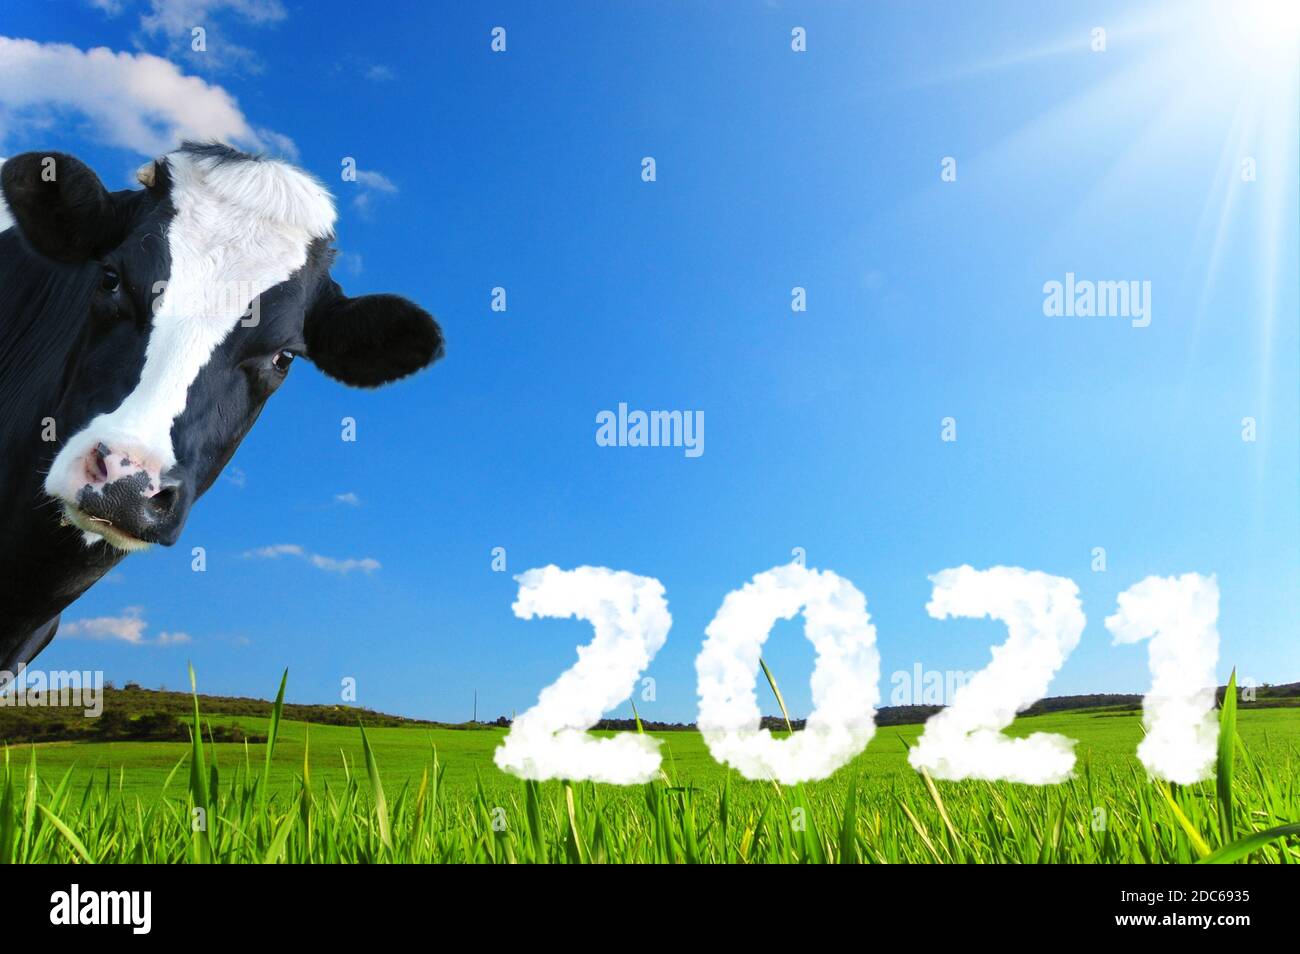 Merry Christmas and Happy New Year with cow, farm. Stock Photo